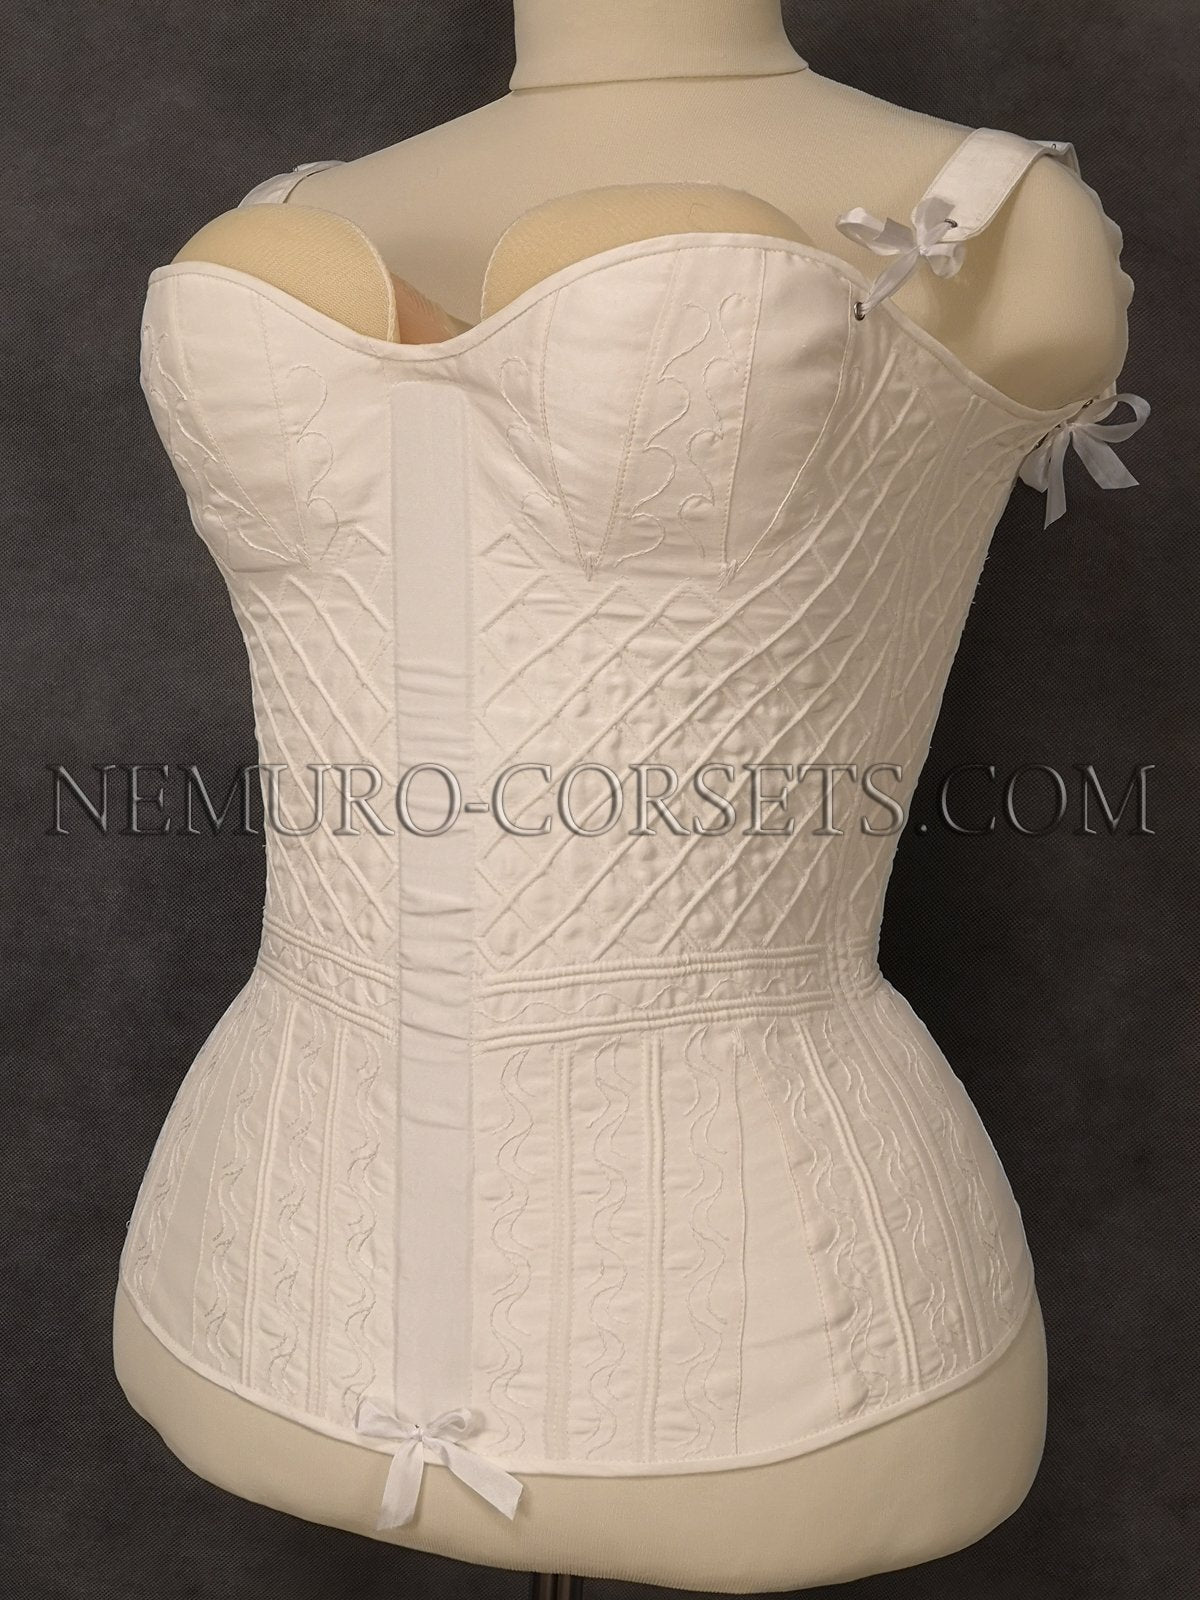 Vintage Style Corset Tops, Dress & Stays